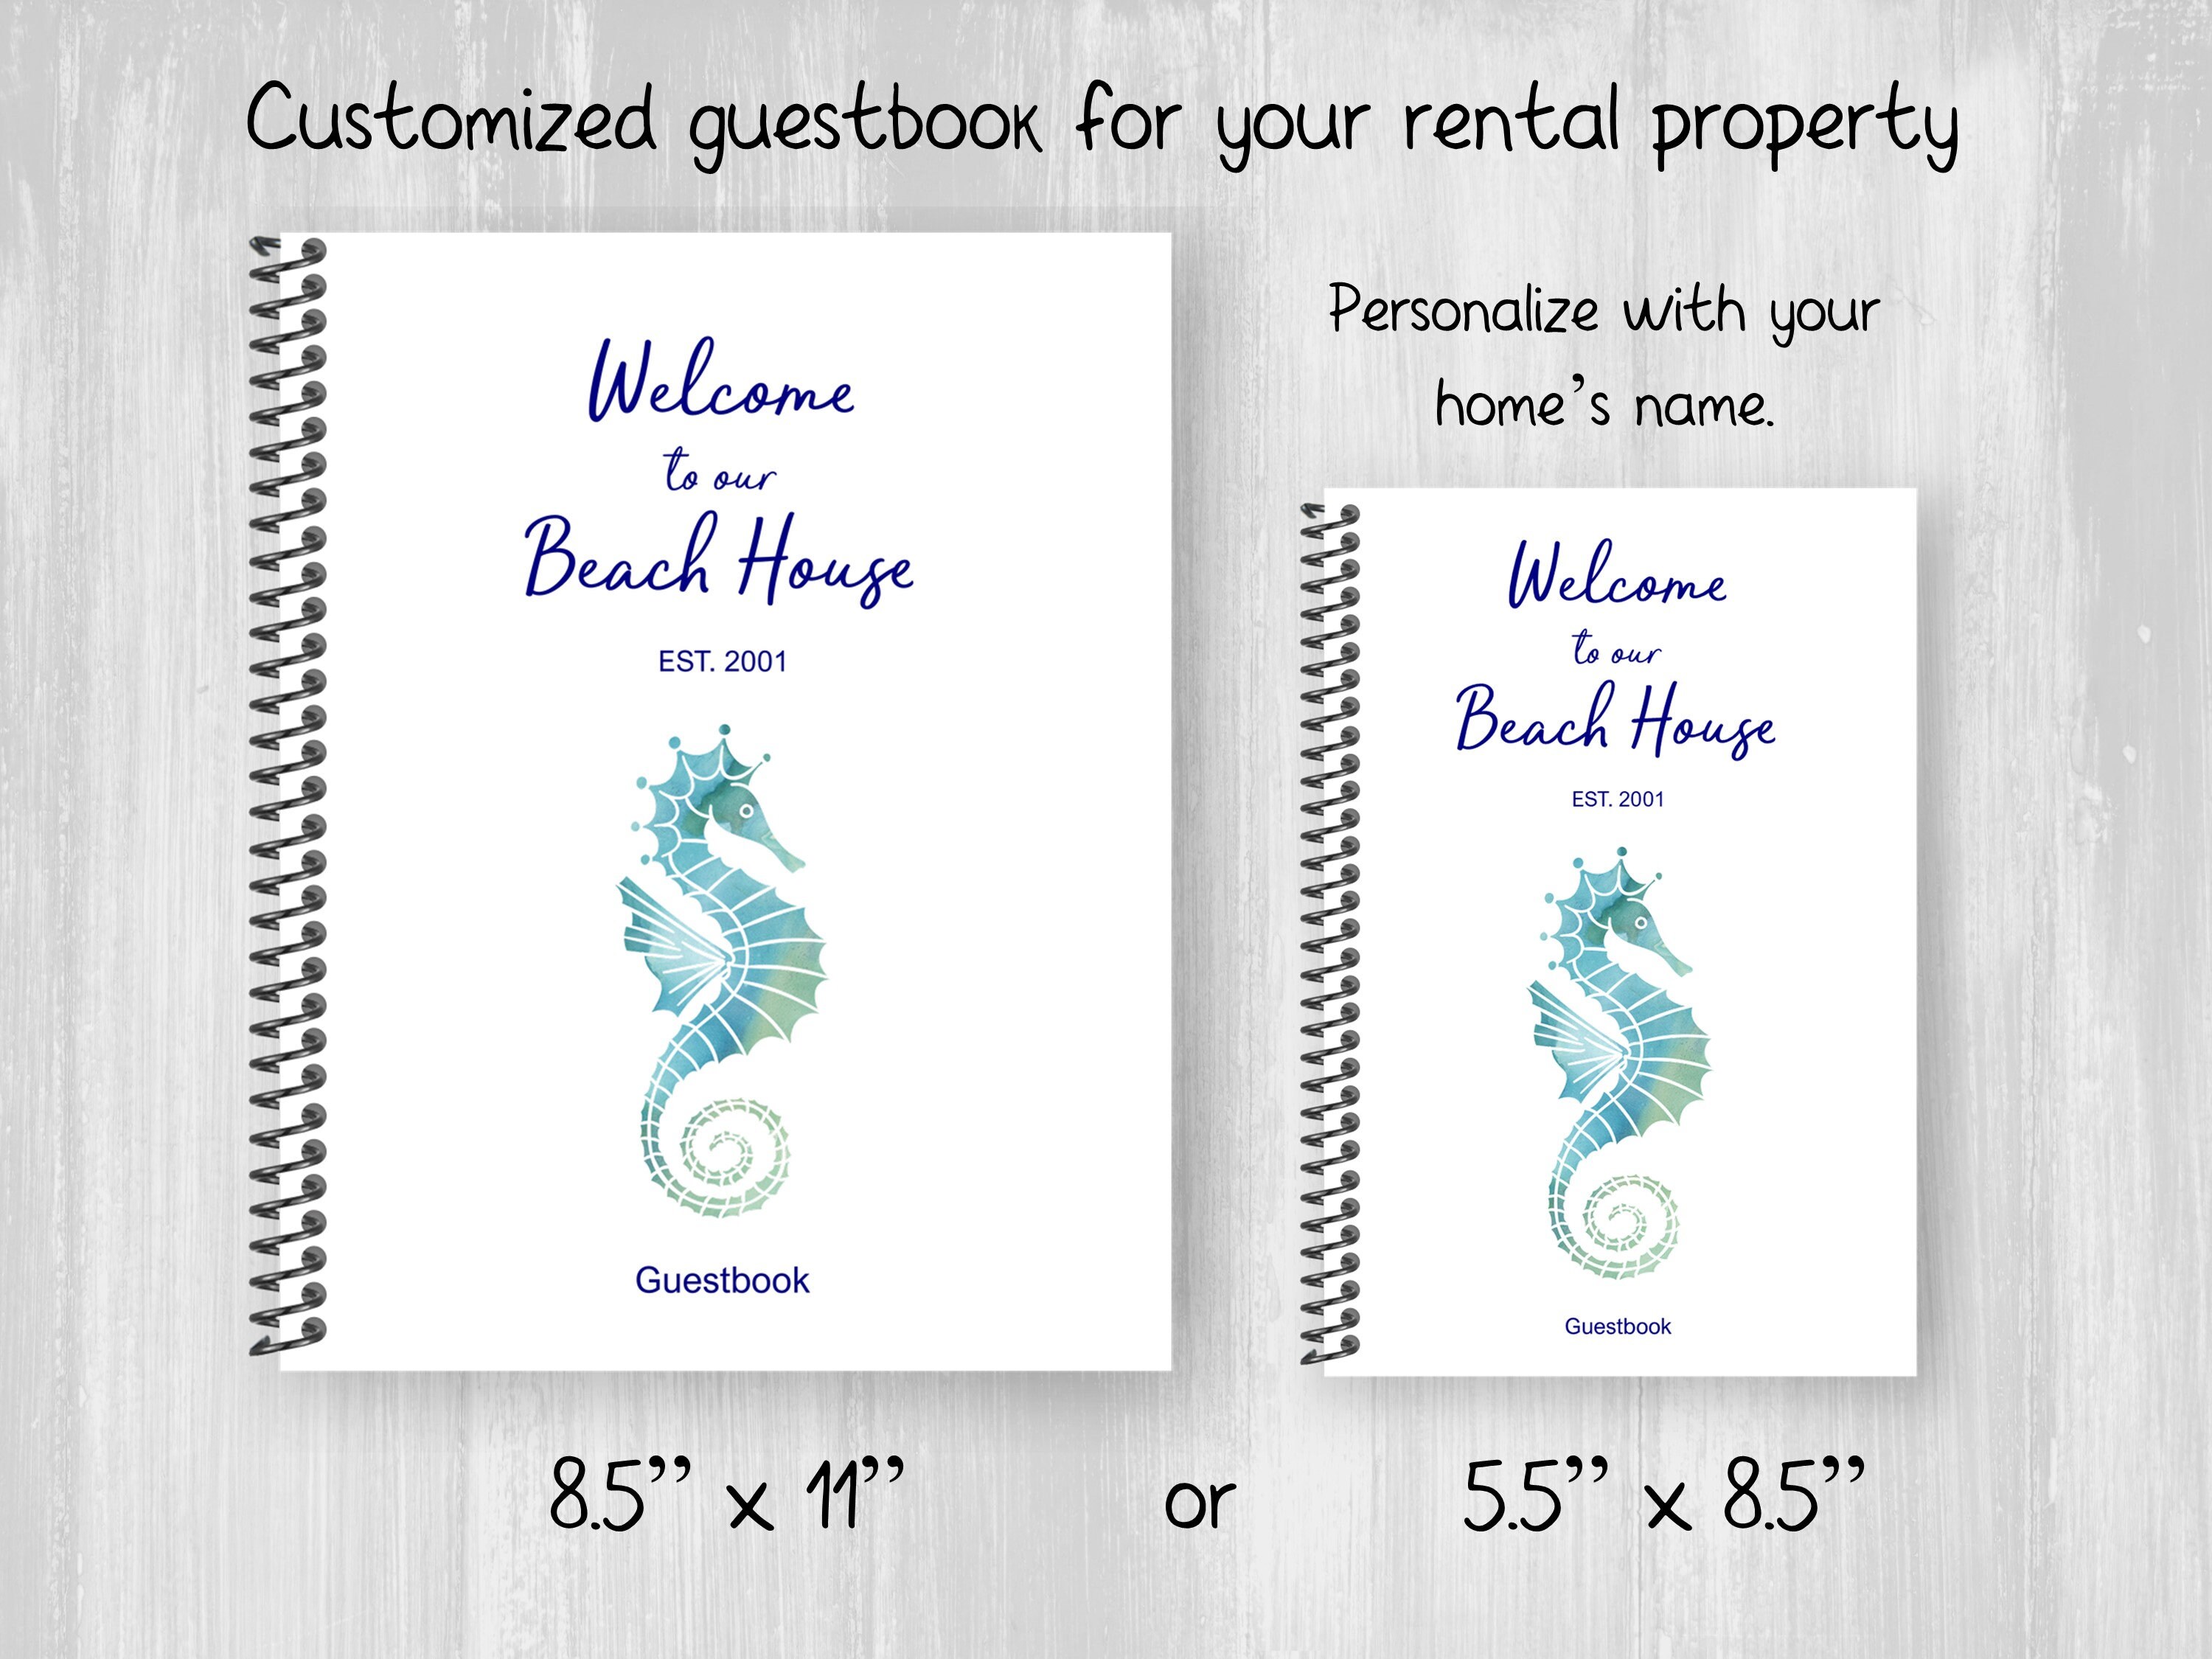 Beach House Guest Book, Visitors Book, New Homeowner Gift